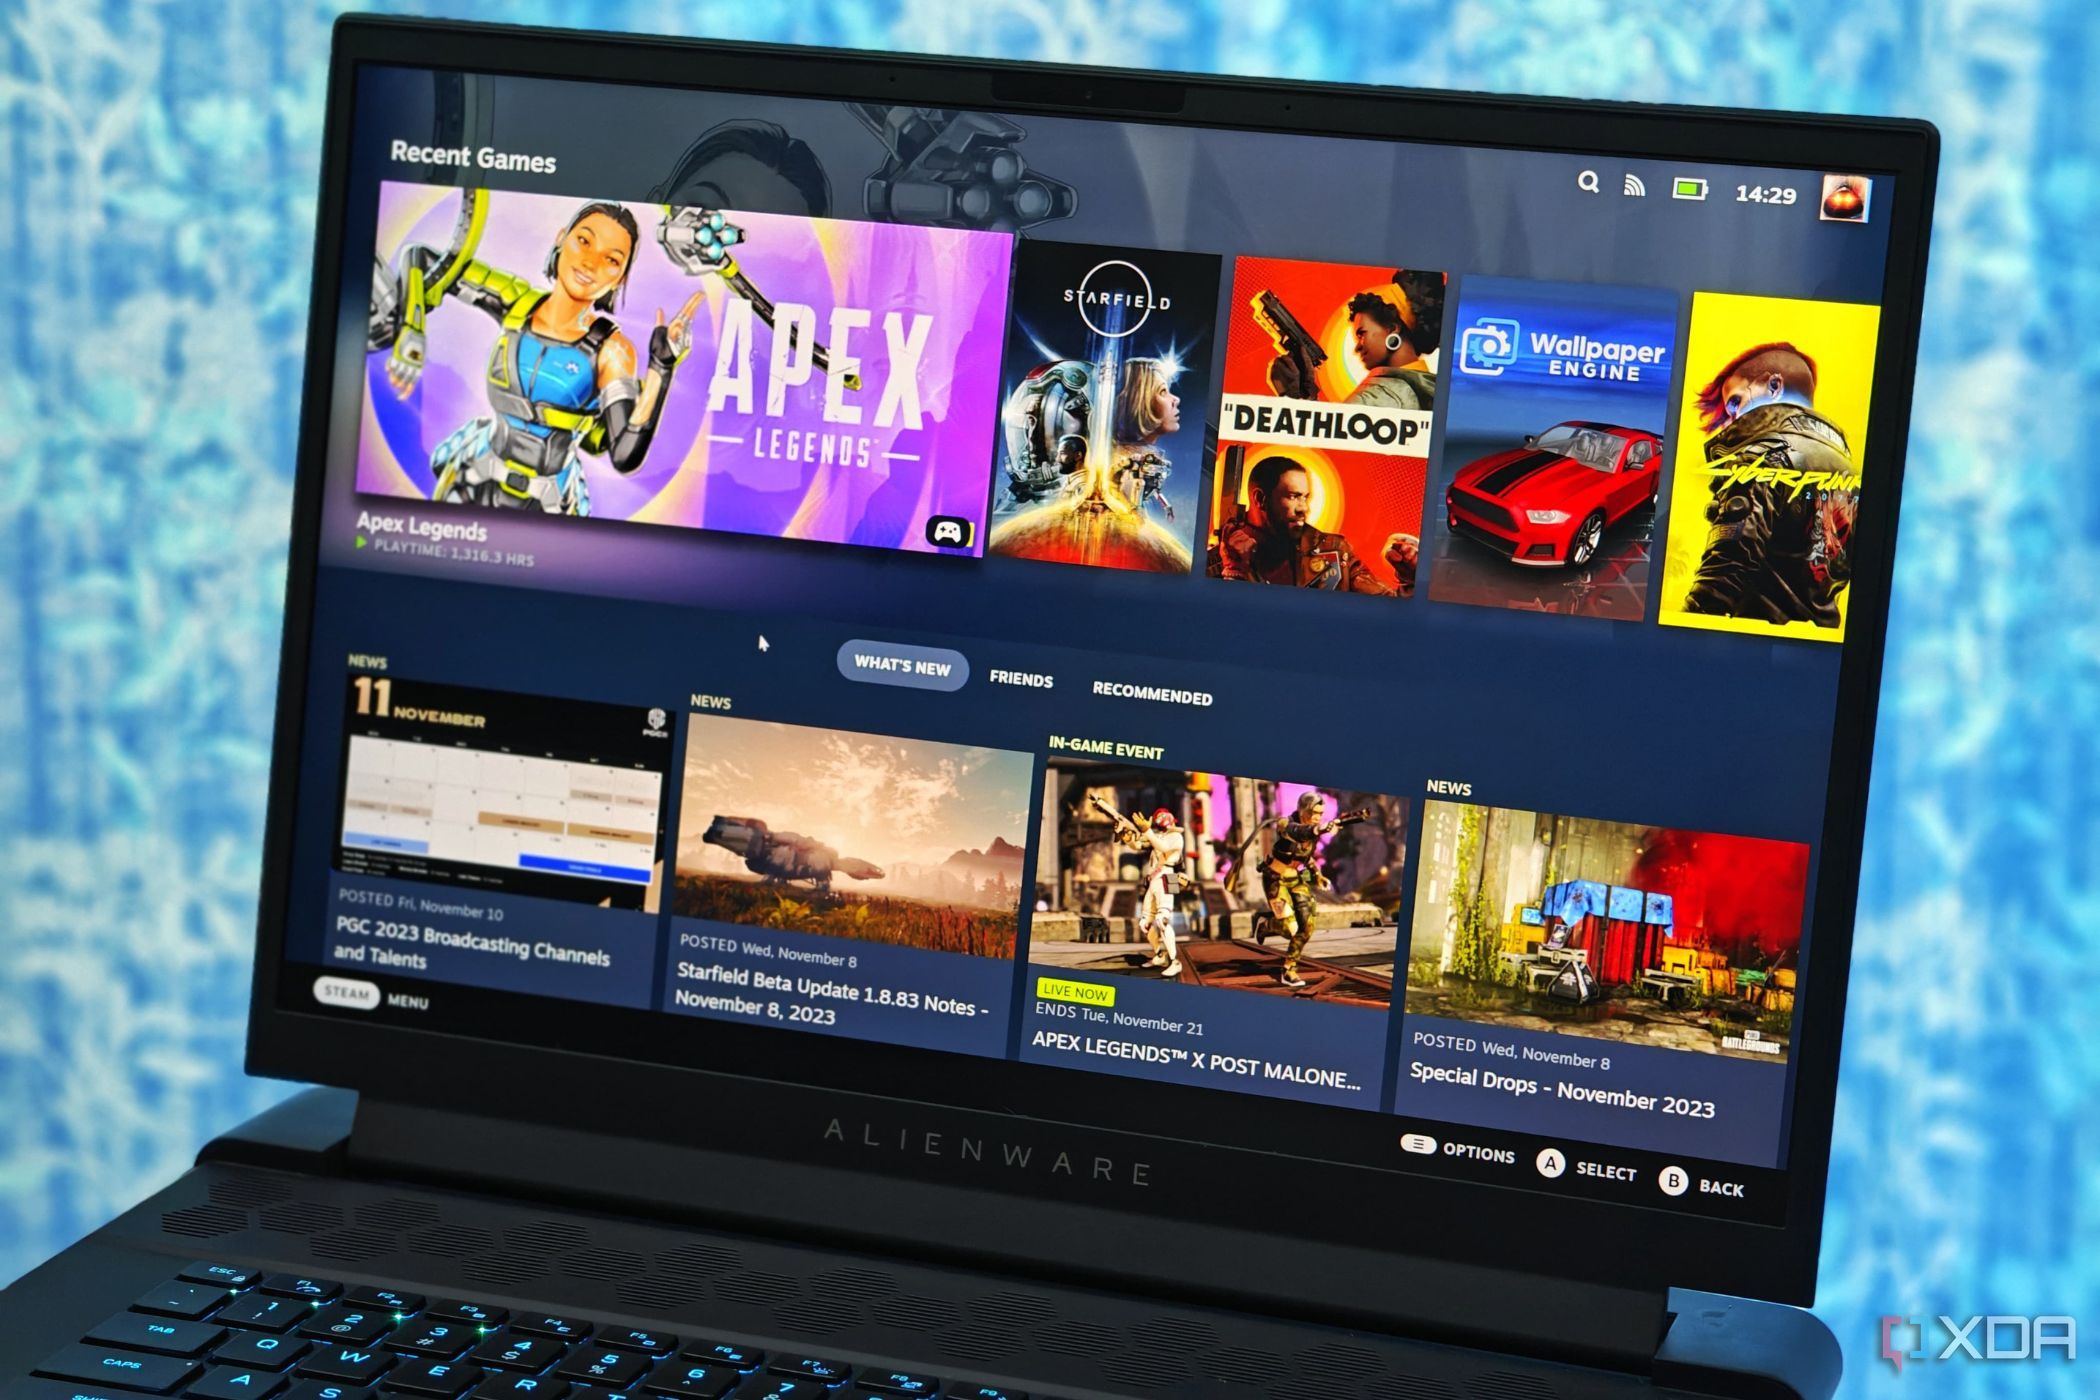 An image showing the Steam Big Picture Mode on an Alienware gaming laptop.